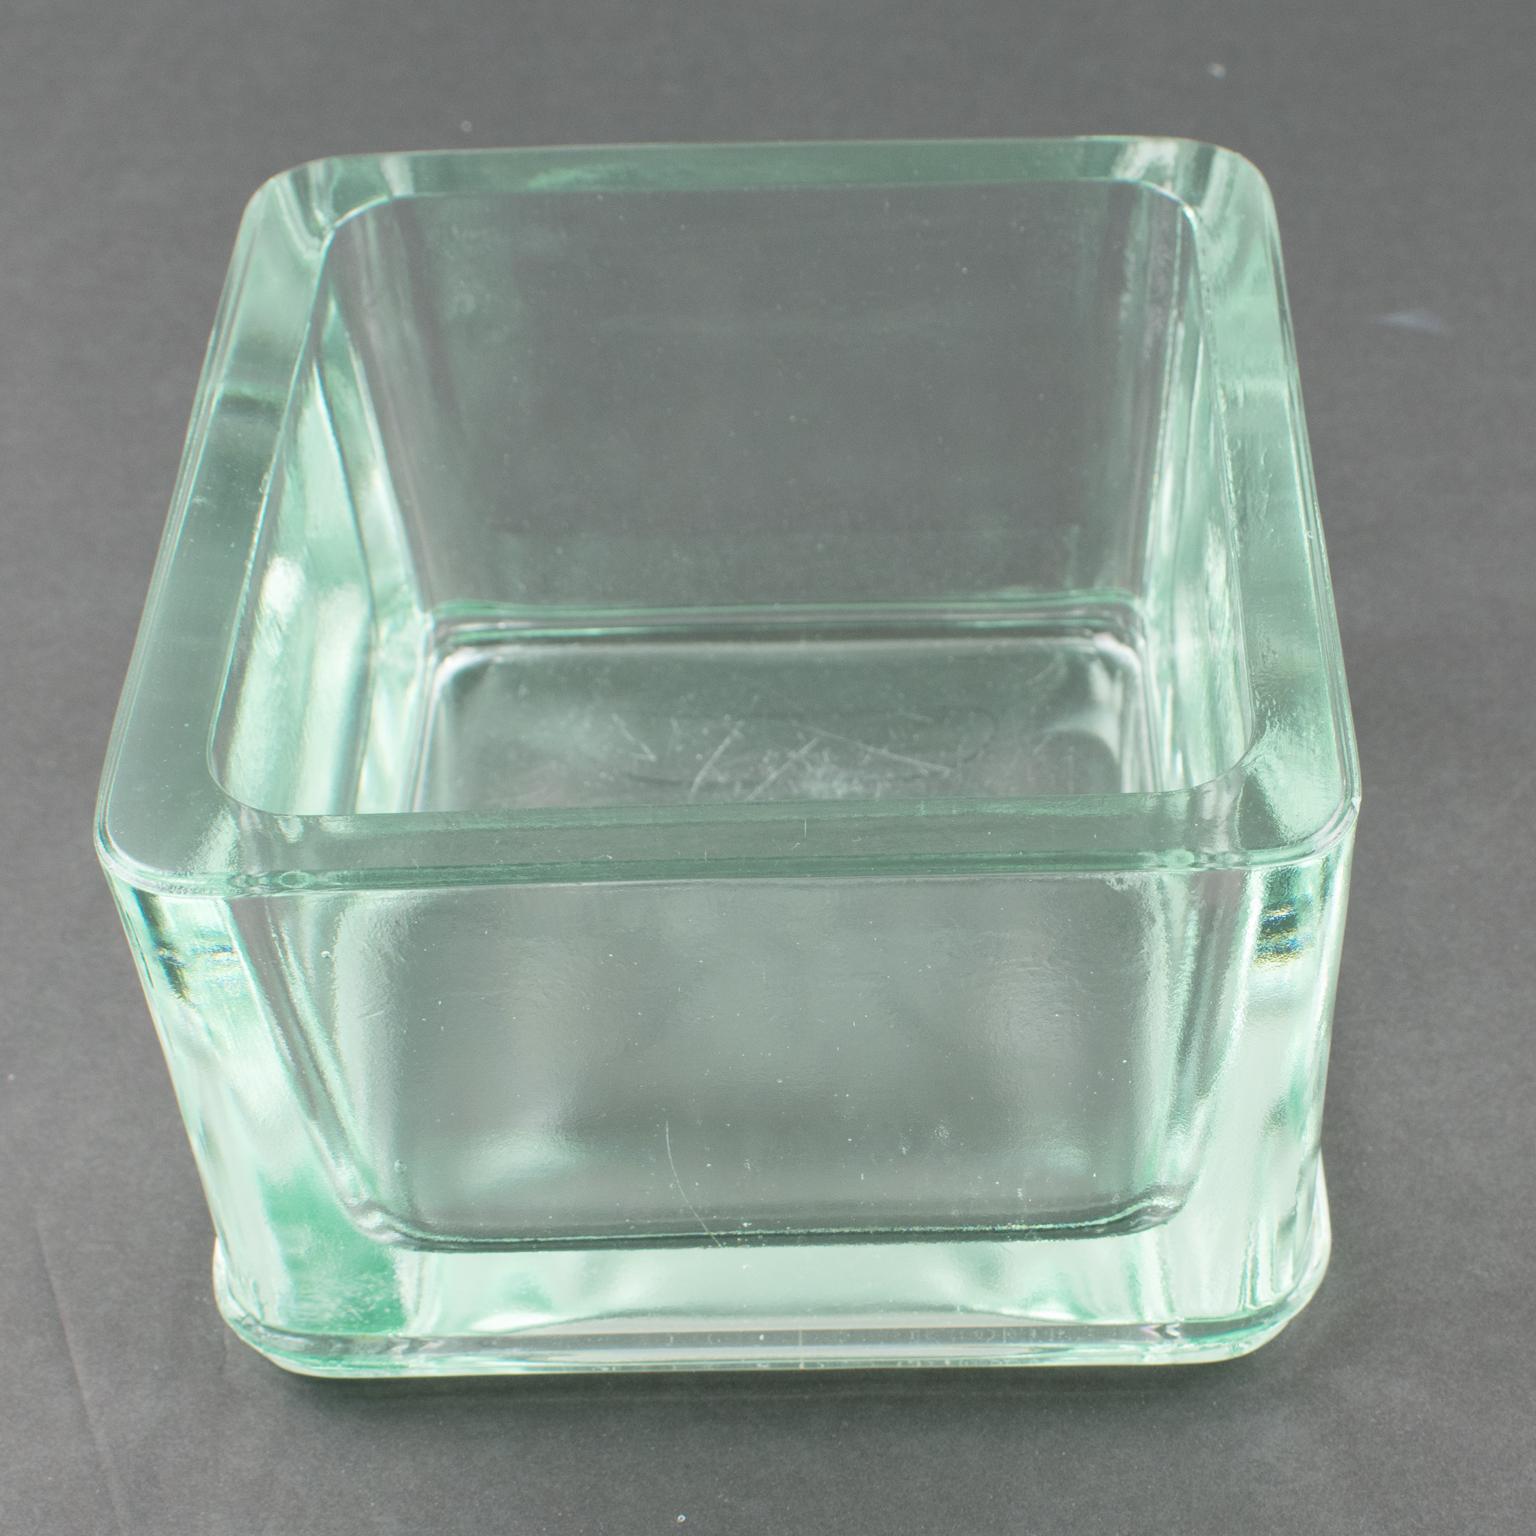 Industrial thick molded glass desktop accessory, desk tidy, cigar ashtray or catchall, manufactured by Lumax, France. Original design by Le Corbusier. Molded marking on side reads 